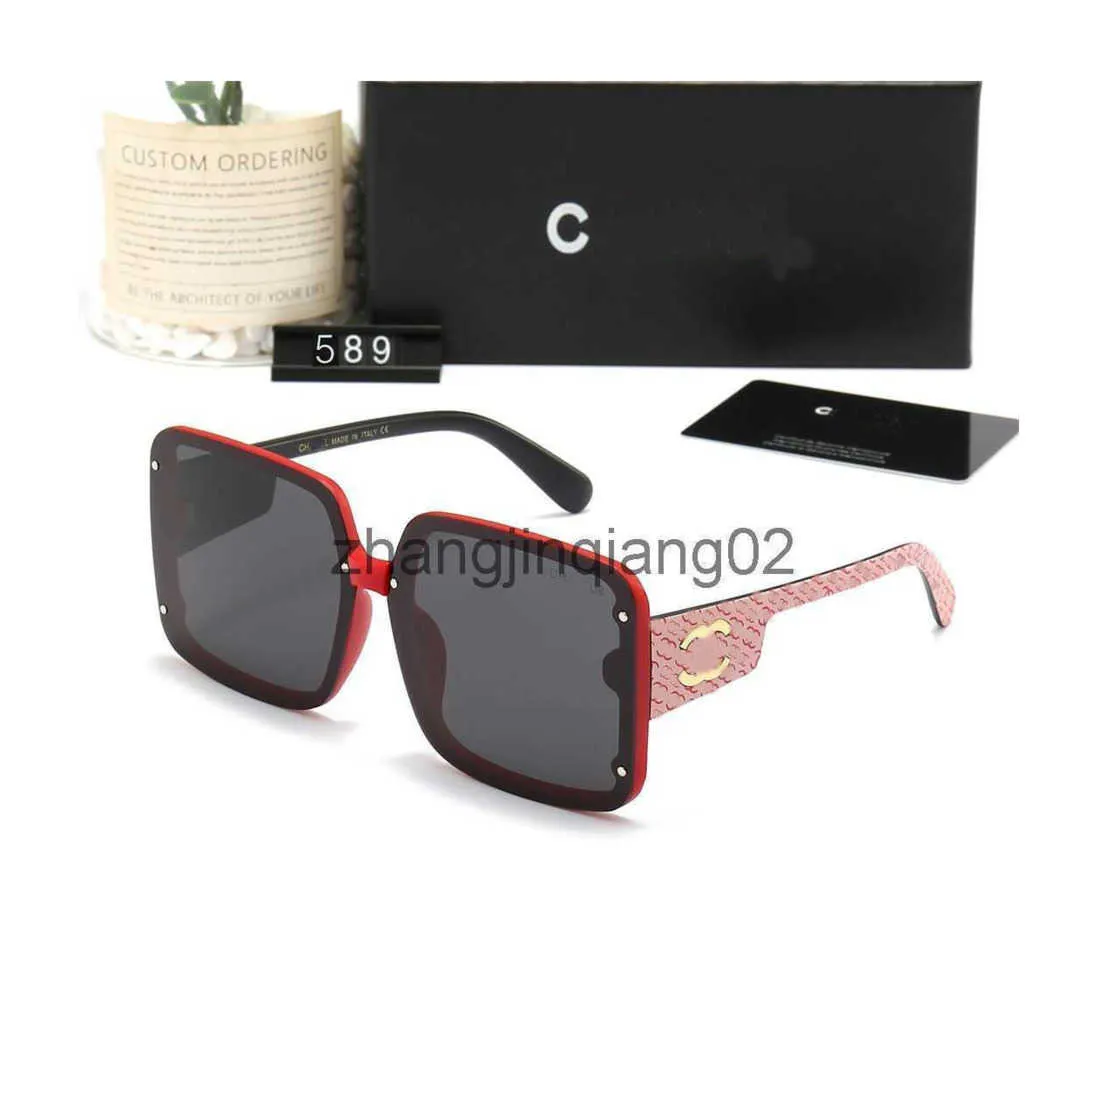 Luxurious Designer Polarized Gargoyle Sunglasses For Men And Women Vintage  Style For Sports, Baseball, Summer Beach And Driving Black And Red Square  Sun Glasses From Zhangjinqiang02, $15.03